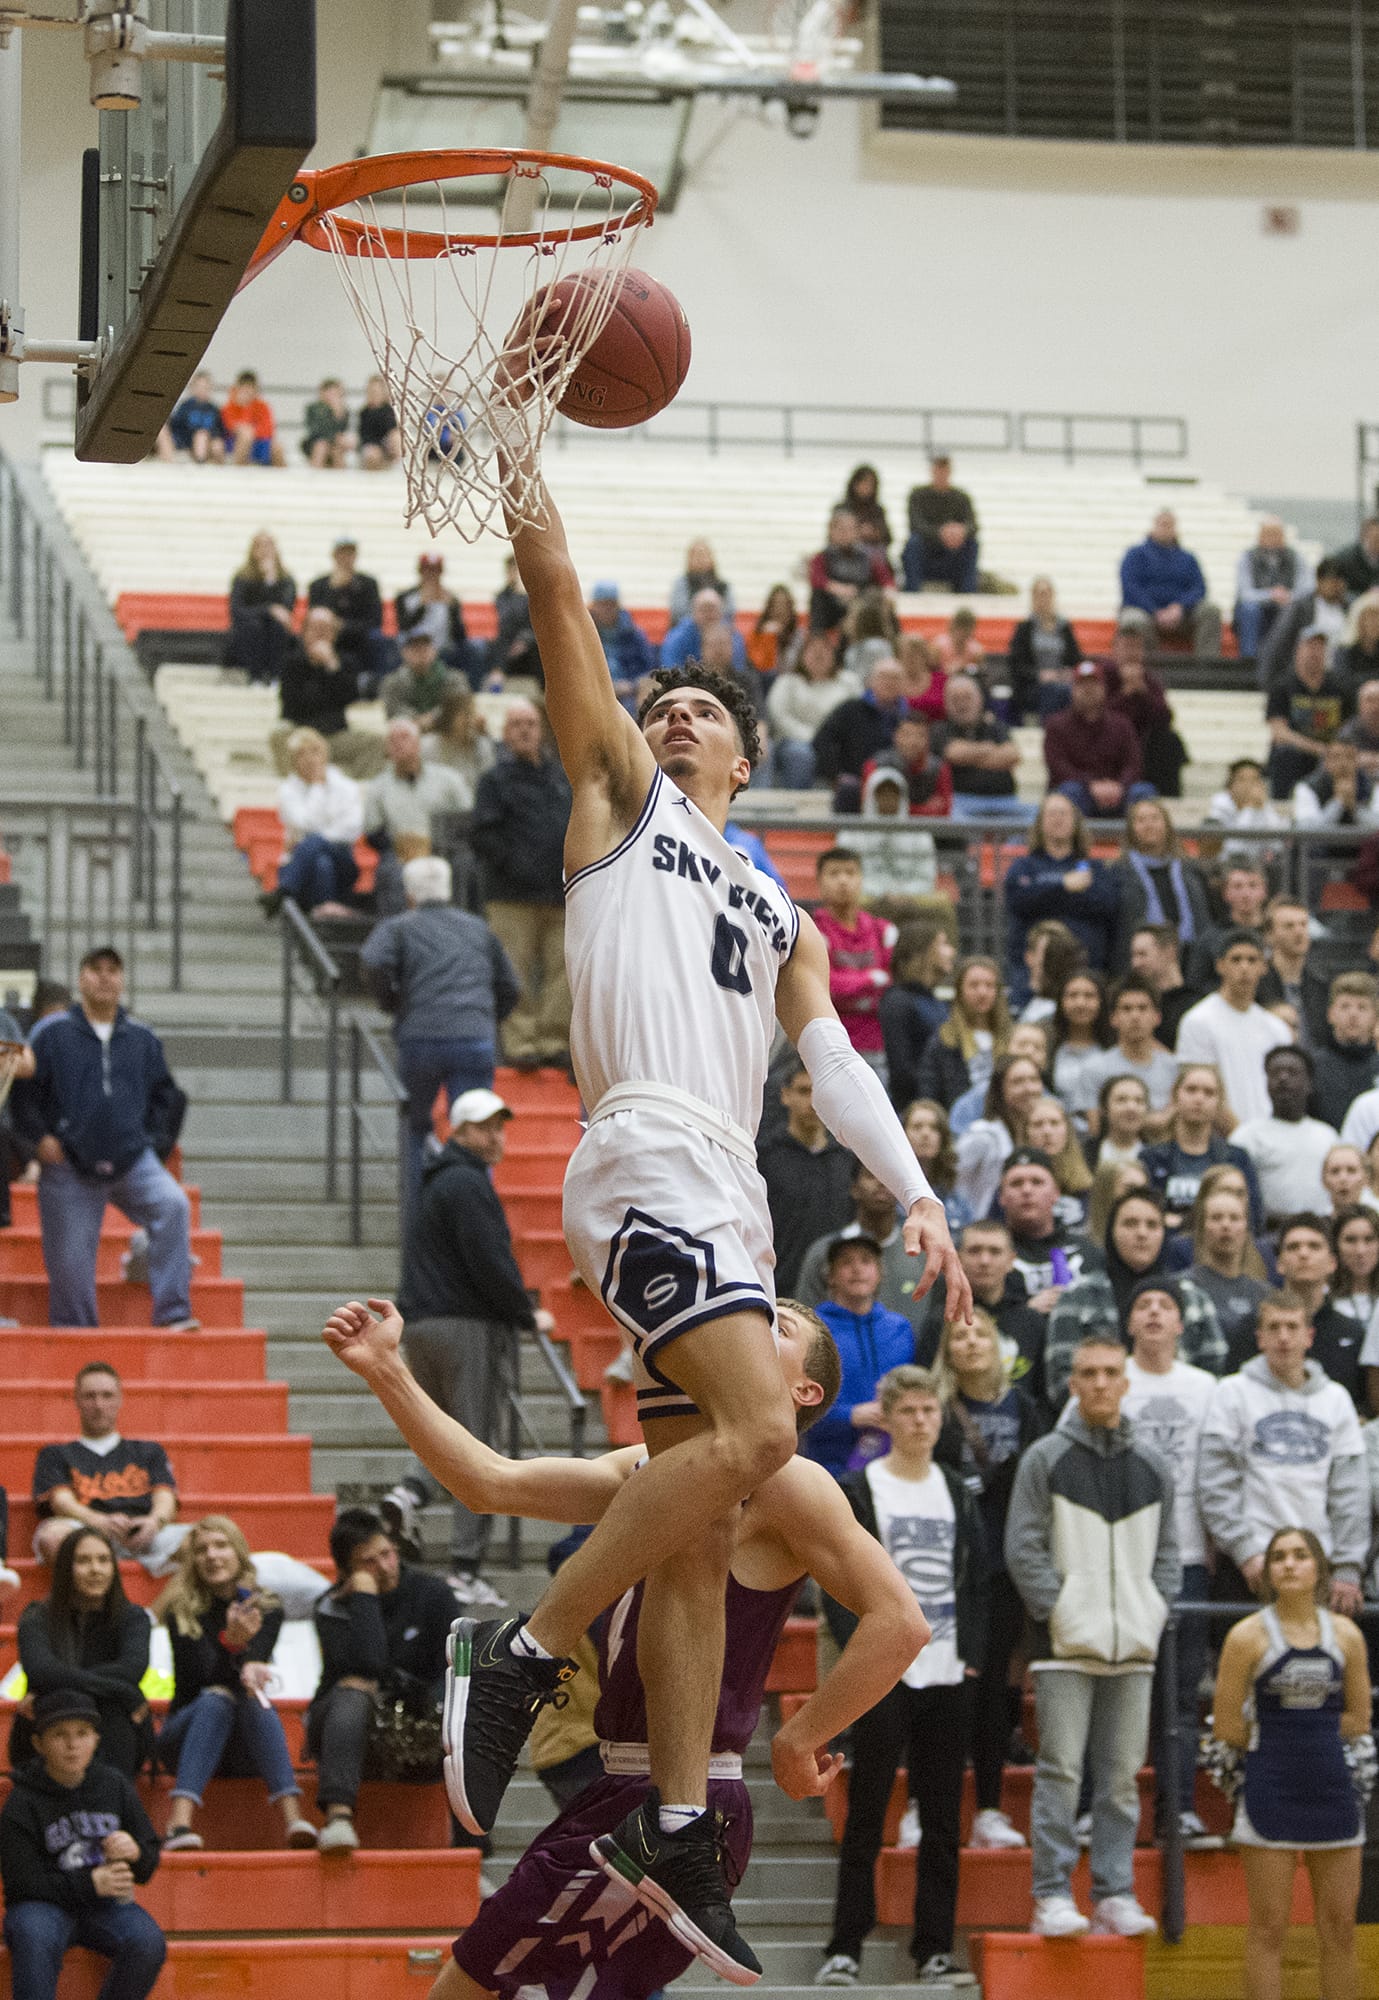 Skyview’s Alex Schumacher (0) goes up to dunk the ball during the 4A regional game against Enumclaw at Battle Ground High School, Saturday February 24, 2018.